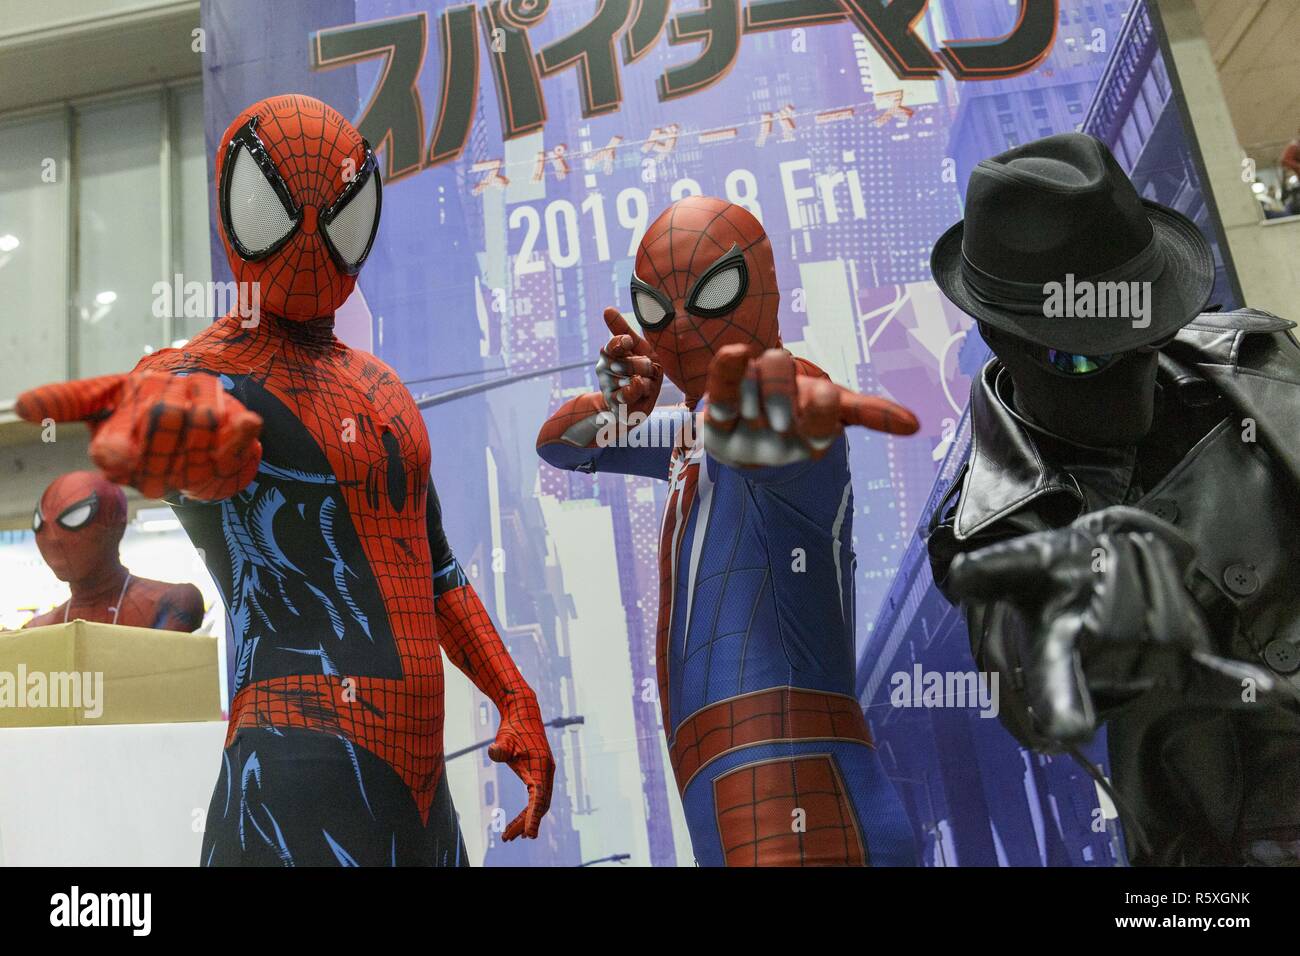 Chiba, Japan. 2nd Dec, 2018. Cosplayers dressed as Spider-Man pose for a photograph during the Tokyo Comic Con 2018 at Makuhari Messe International Exhibition Hall in Chiba. Organizers expect approx. 50,000 visitors during the third annual edition of Tokyo Comic Con which is taking place from November 30 to December 2. Credit: Rodrigo Reyes Marin/ZUMA Wire/Alamy Live News Stock Photo